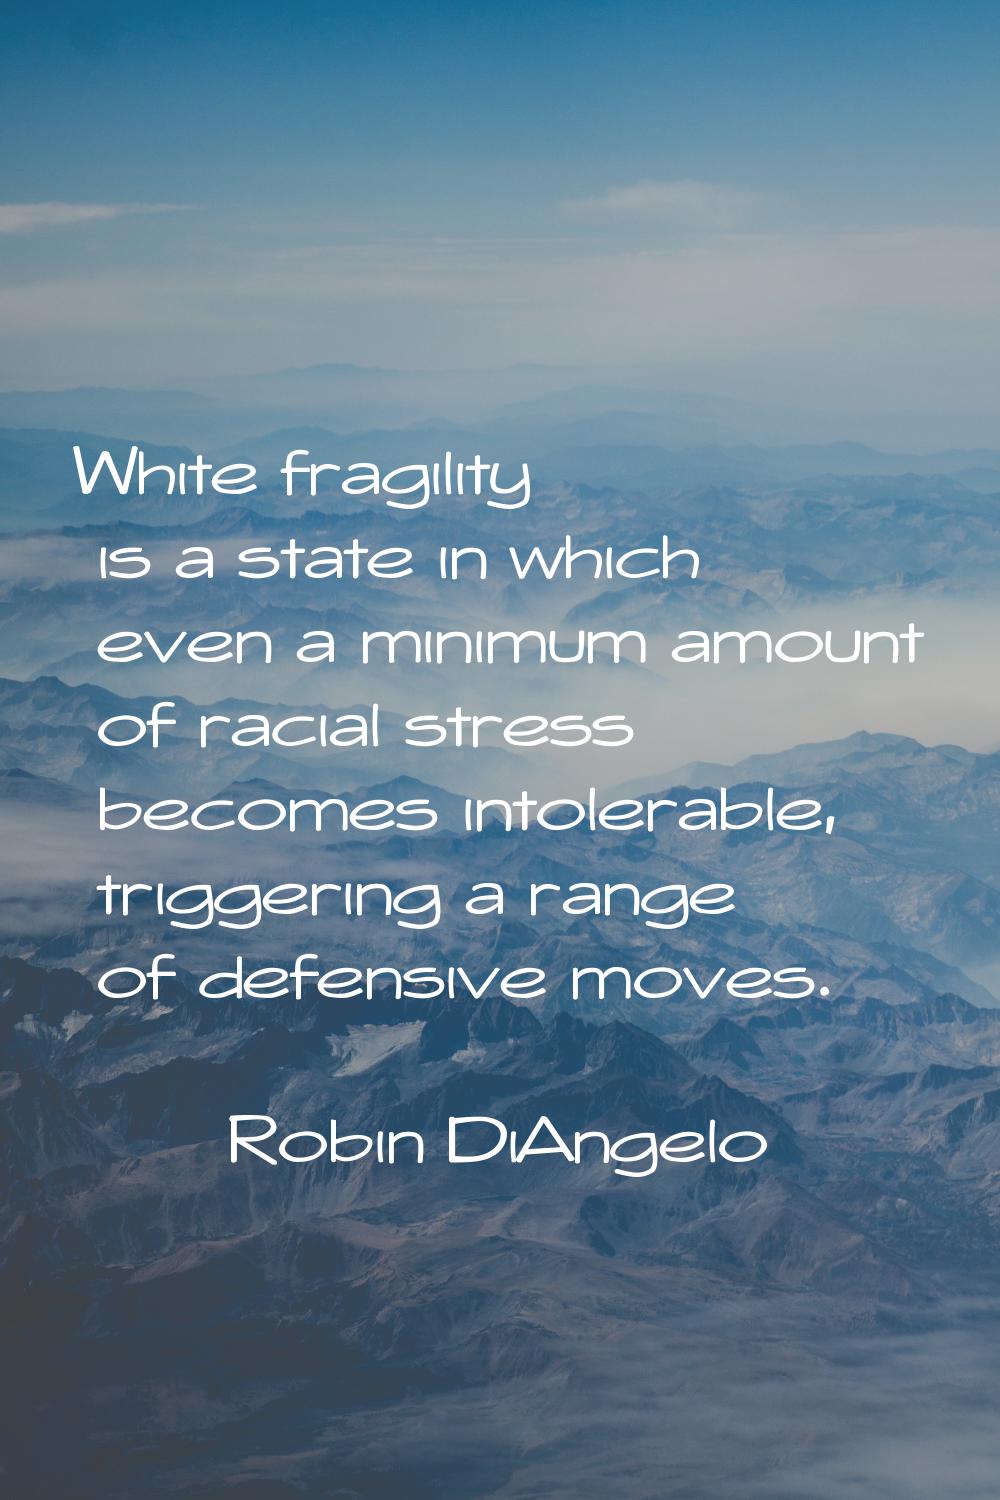 White fragility is a state in which even a minimum amount of racial stress becomes intolerable, tri